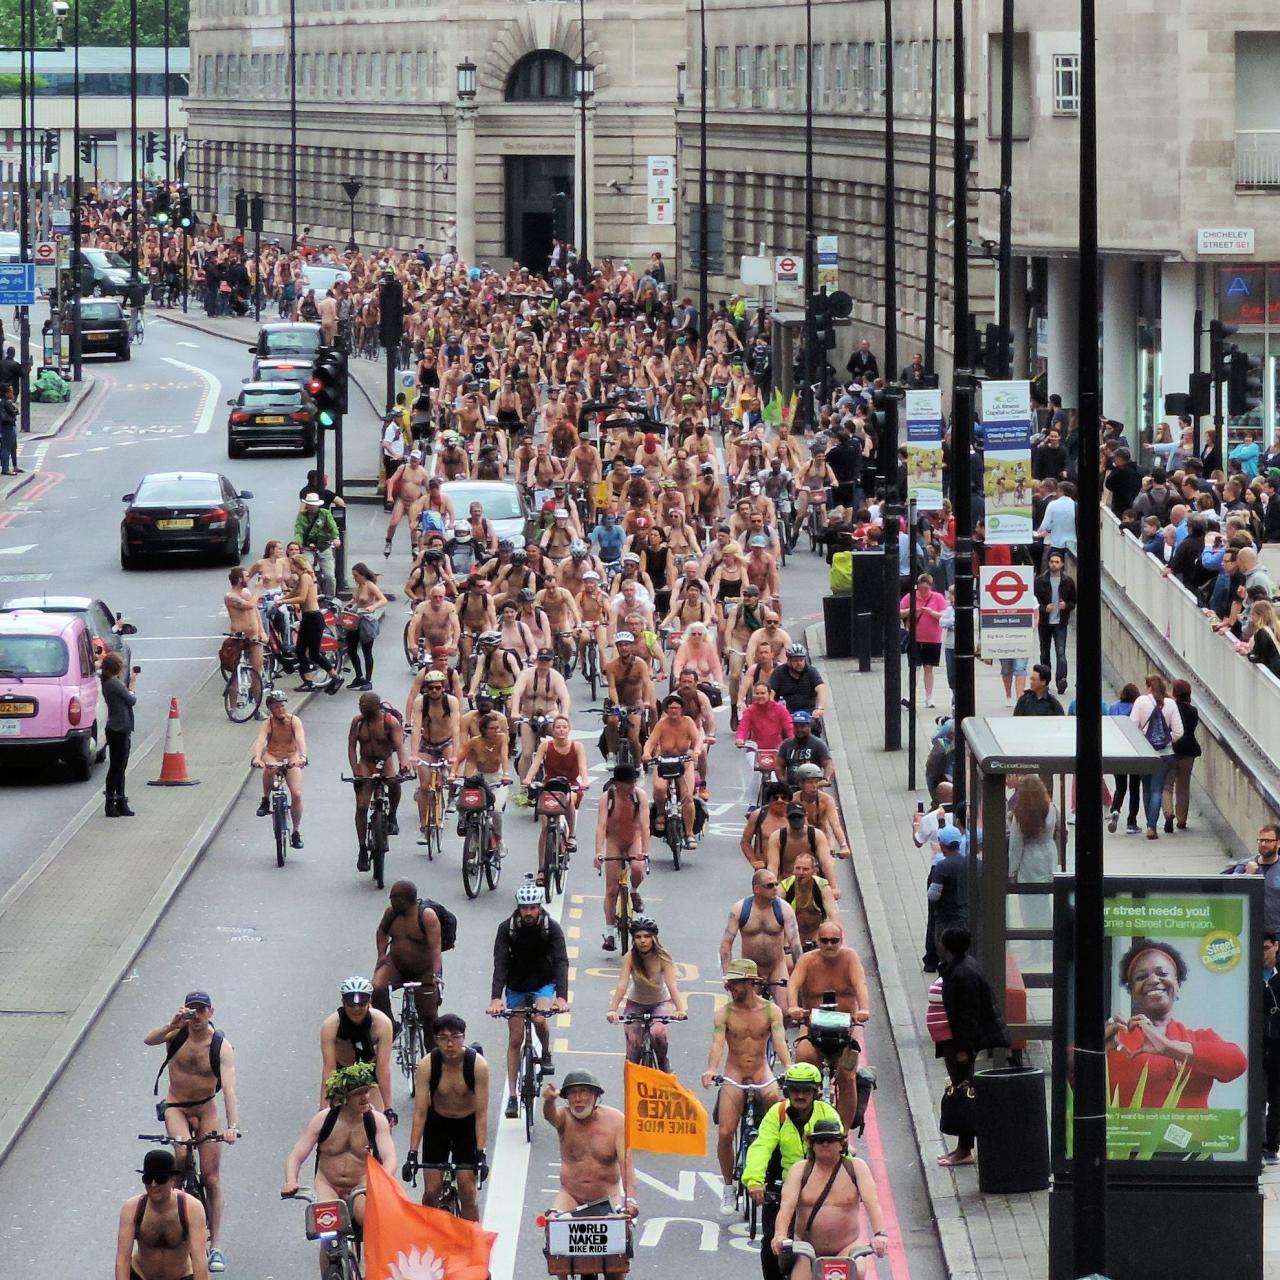 World Naked Bike Ride confirmed for London on 14 August | road.cc